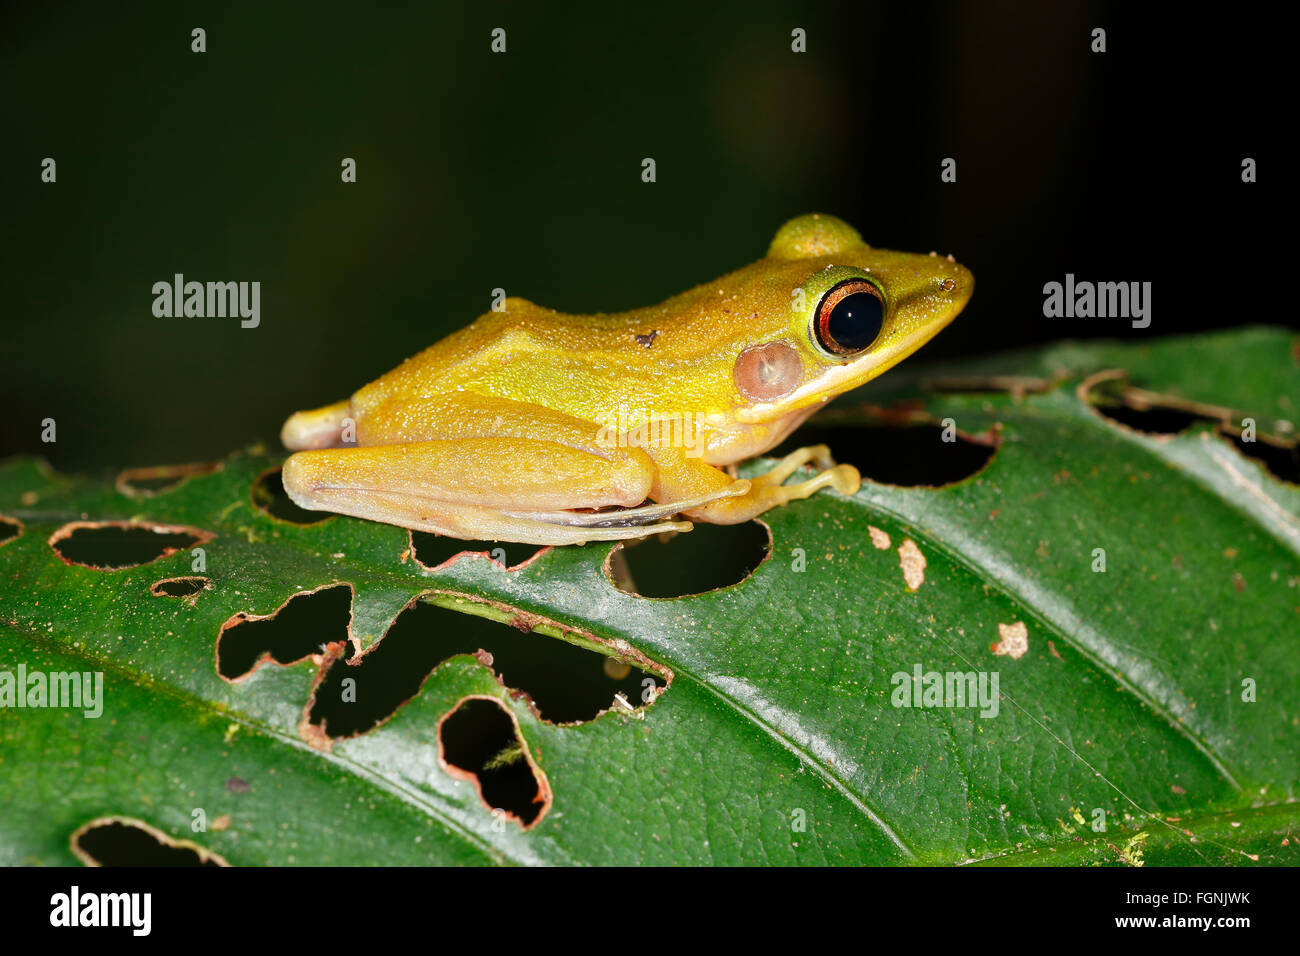 White-lipped frog (Rana chalconota), true frog in the tropical rainforest, by night, Kubah National Park, Sarawak, Borneo Stock Photo